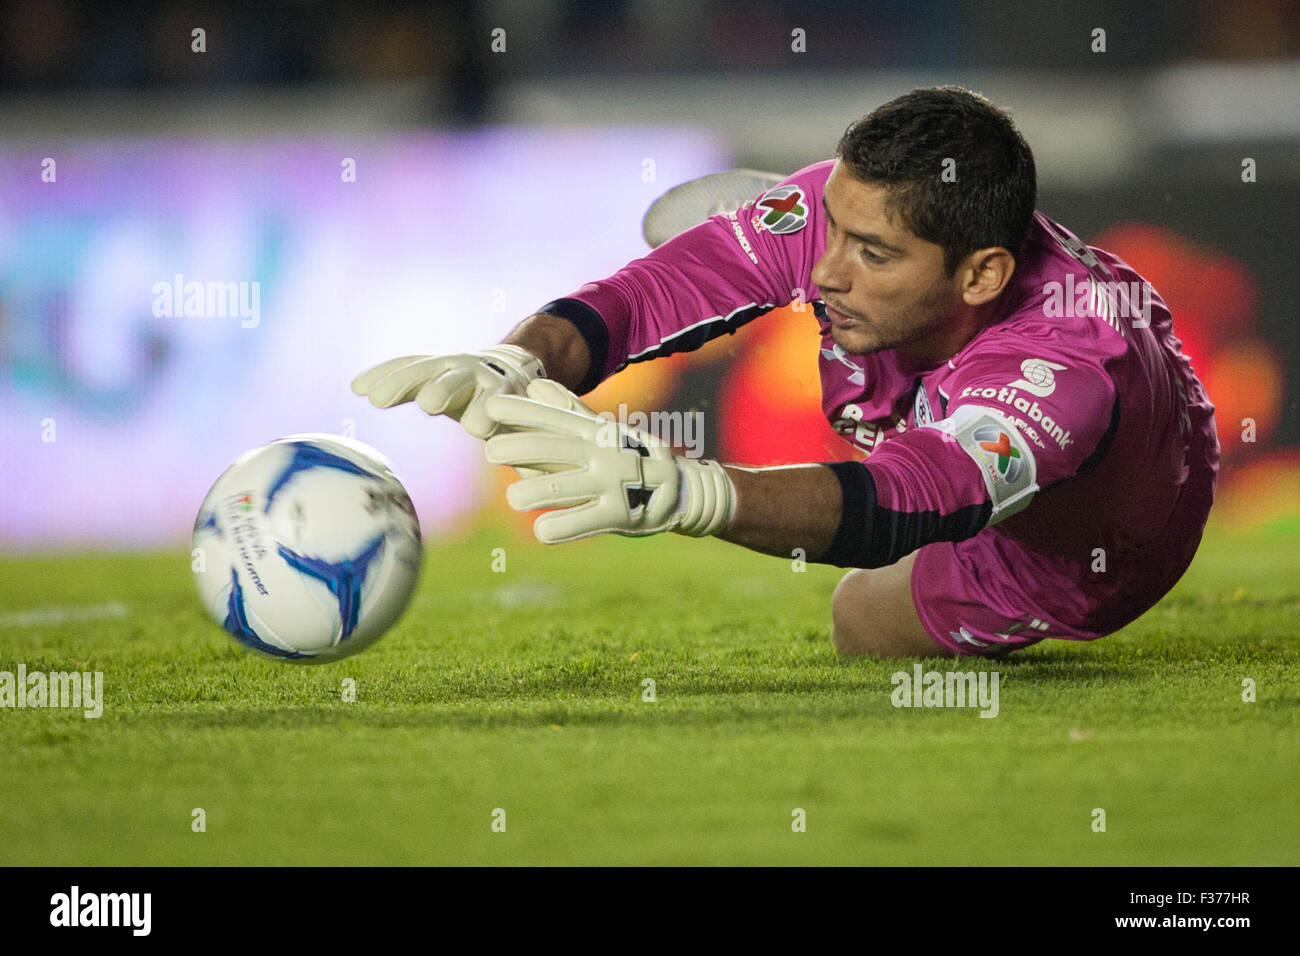 Mexico City, Mexico. 30th Sep, 2015. Cruz Azul's goalkeeper Jesus Corona catches the ball during the match of 2015 Opening Tournament of MX League against Atlas in Mexico City, capital of Mexico, Sept. 30, 2015. © Pedro Mera/Xinhua/Alamy Live News Stock Photo